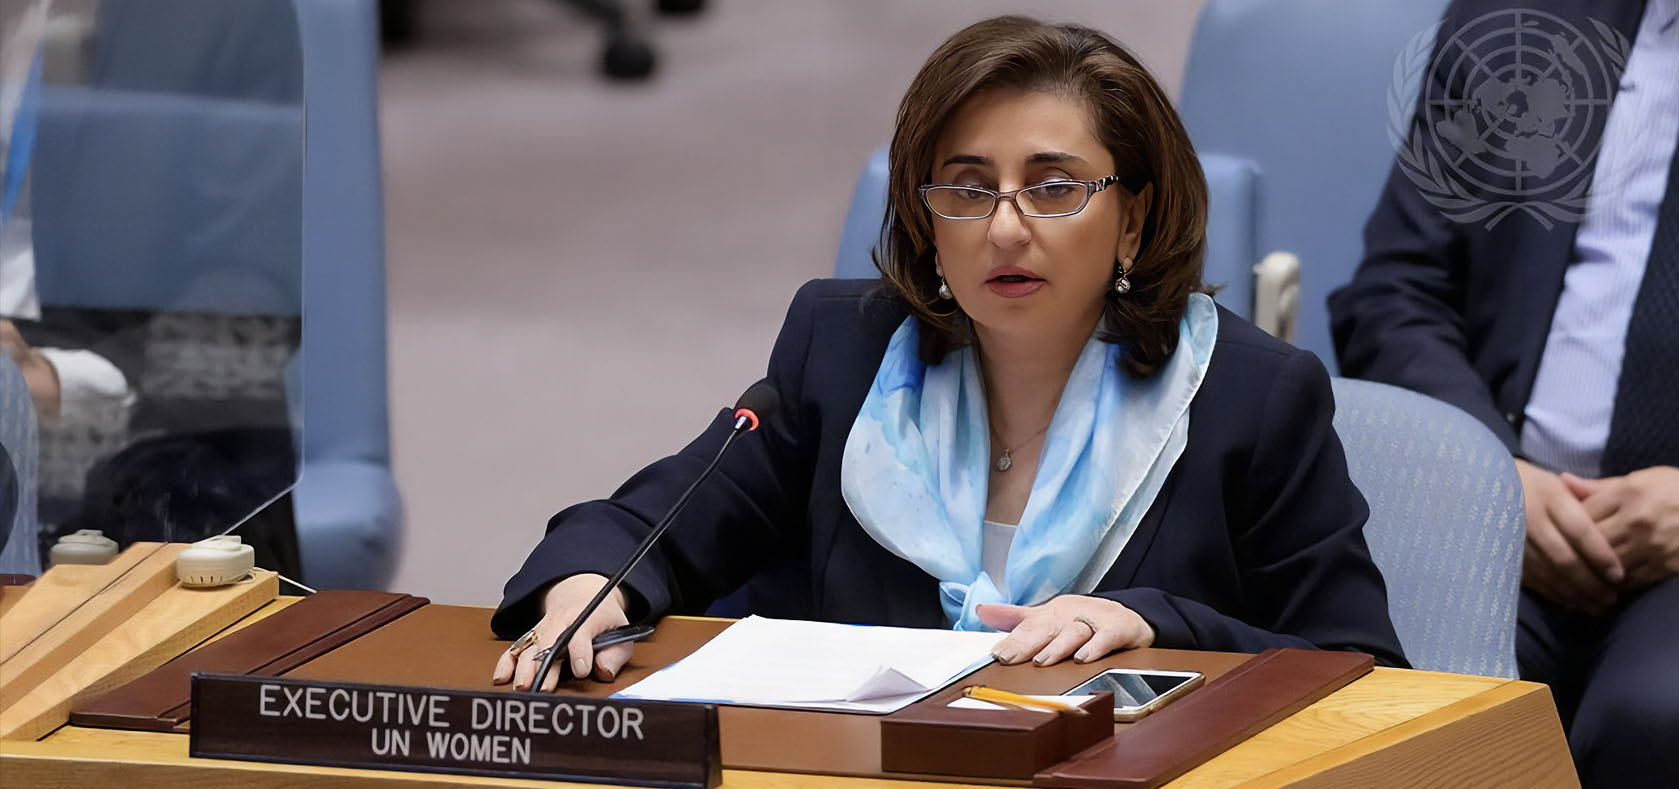 Sima Bahous, Executive Director of UN Women, briefs the Security Council meeting on the maintenance of peace and security in Ukraine. Photo: UN Photo/Manuel Elías